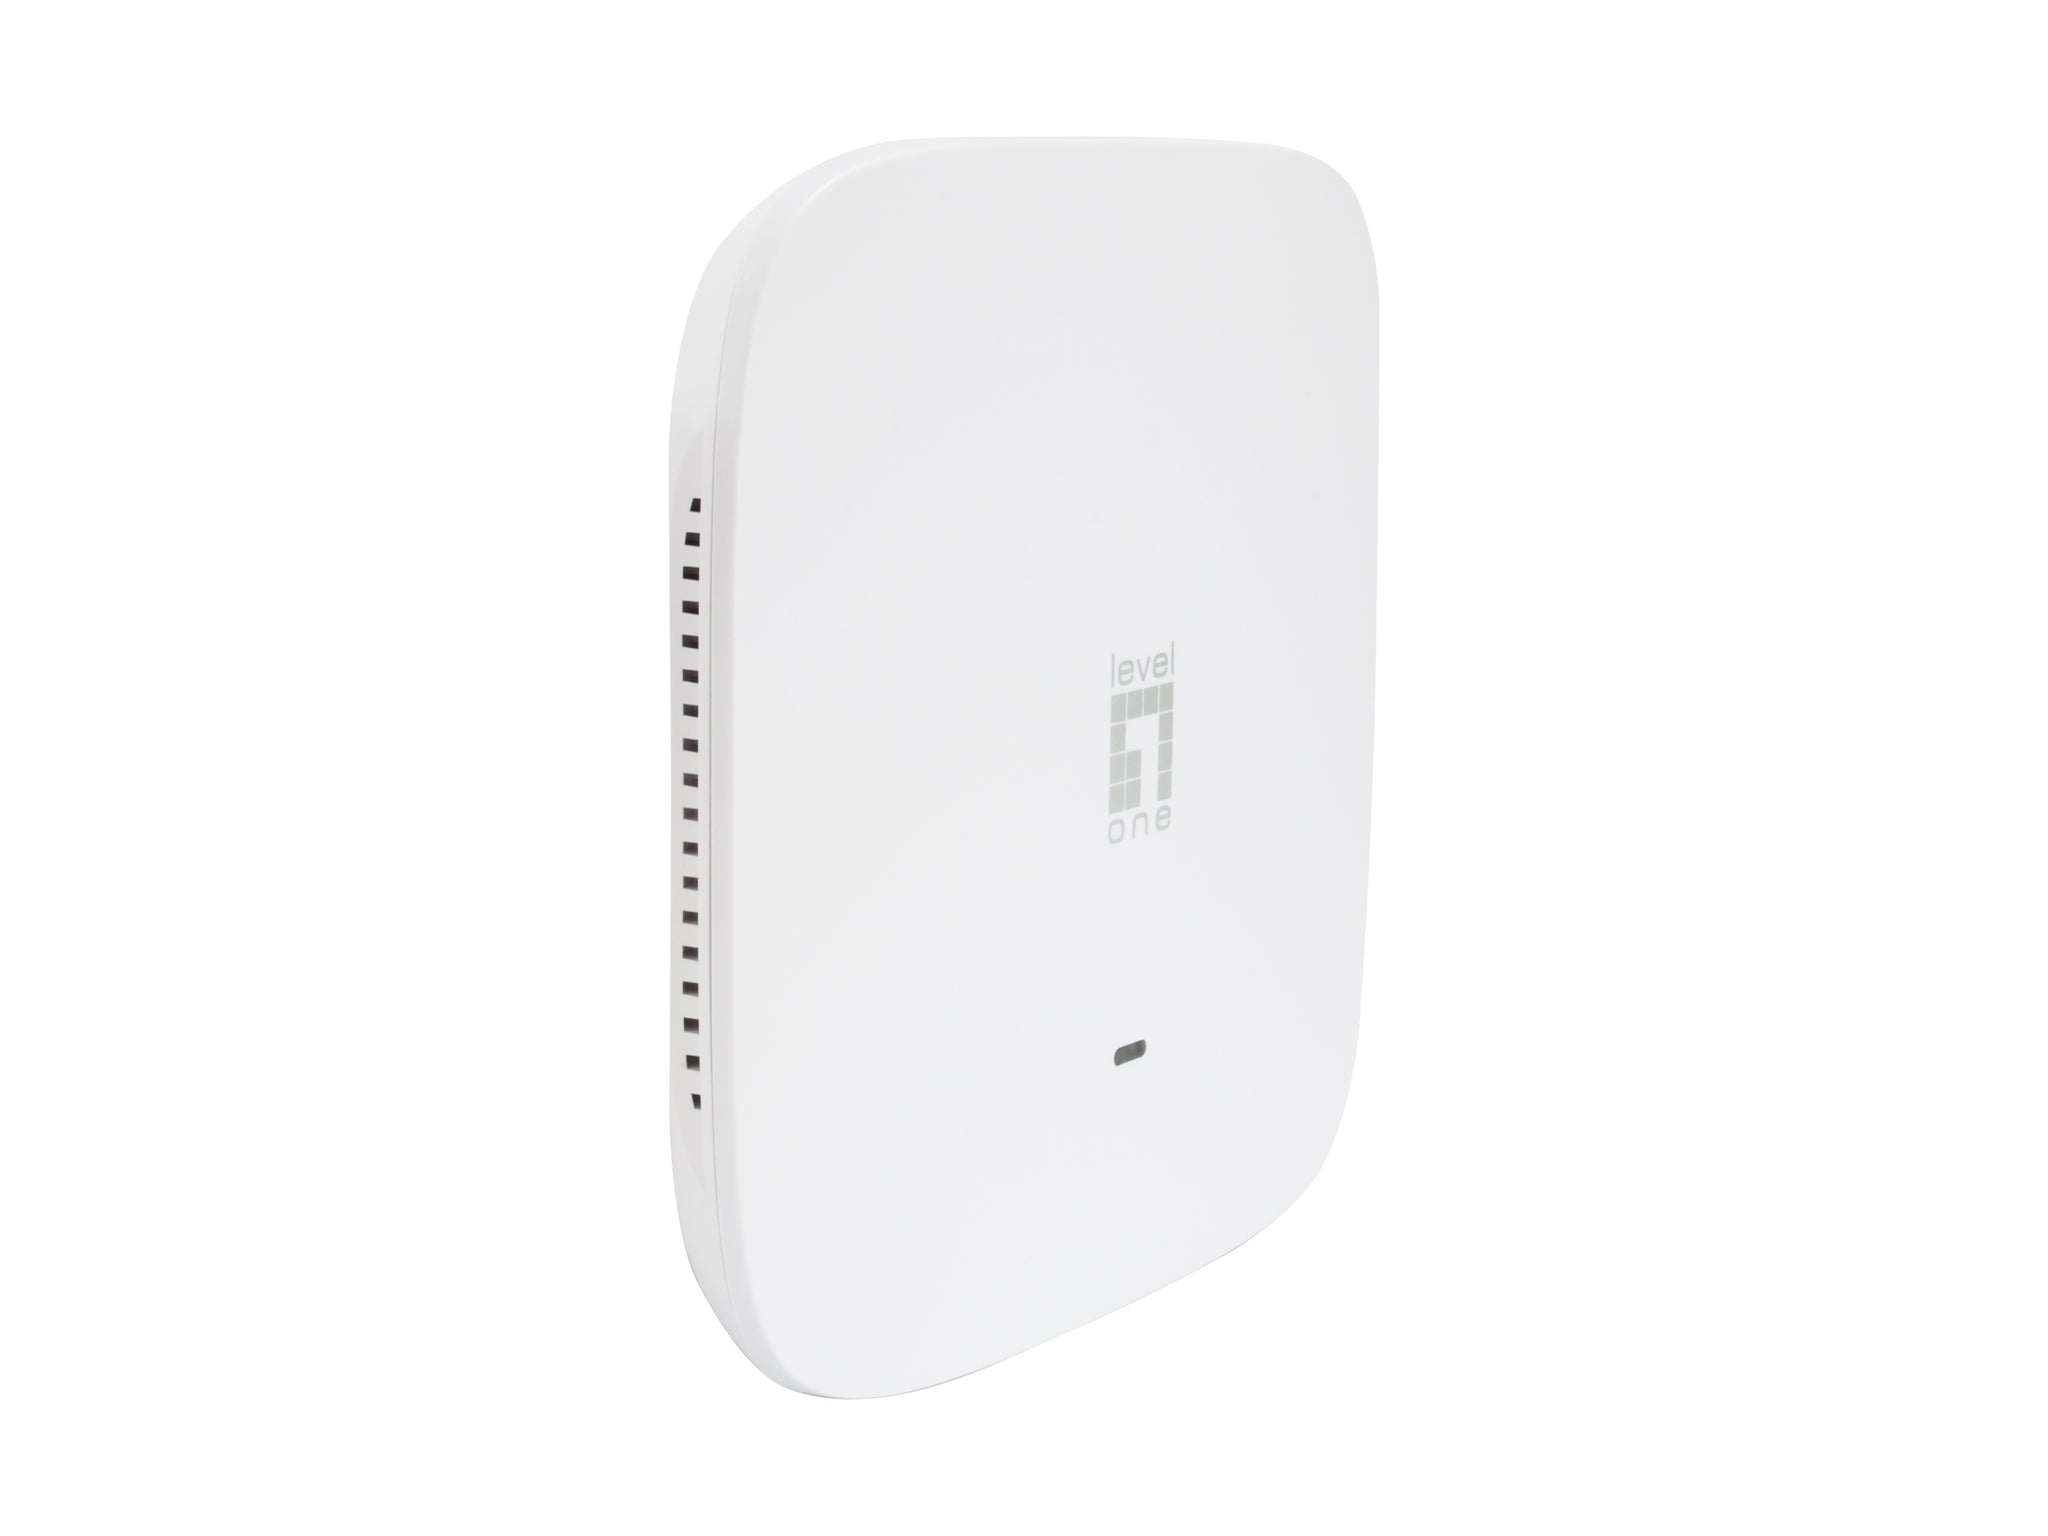 WAP-8121 AC750 Dual Band PoE Wireless Access Point, Ceiling Mount, Controller Managed